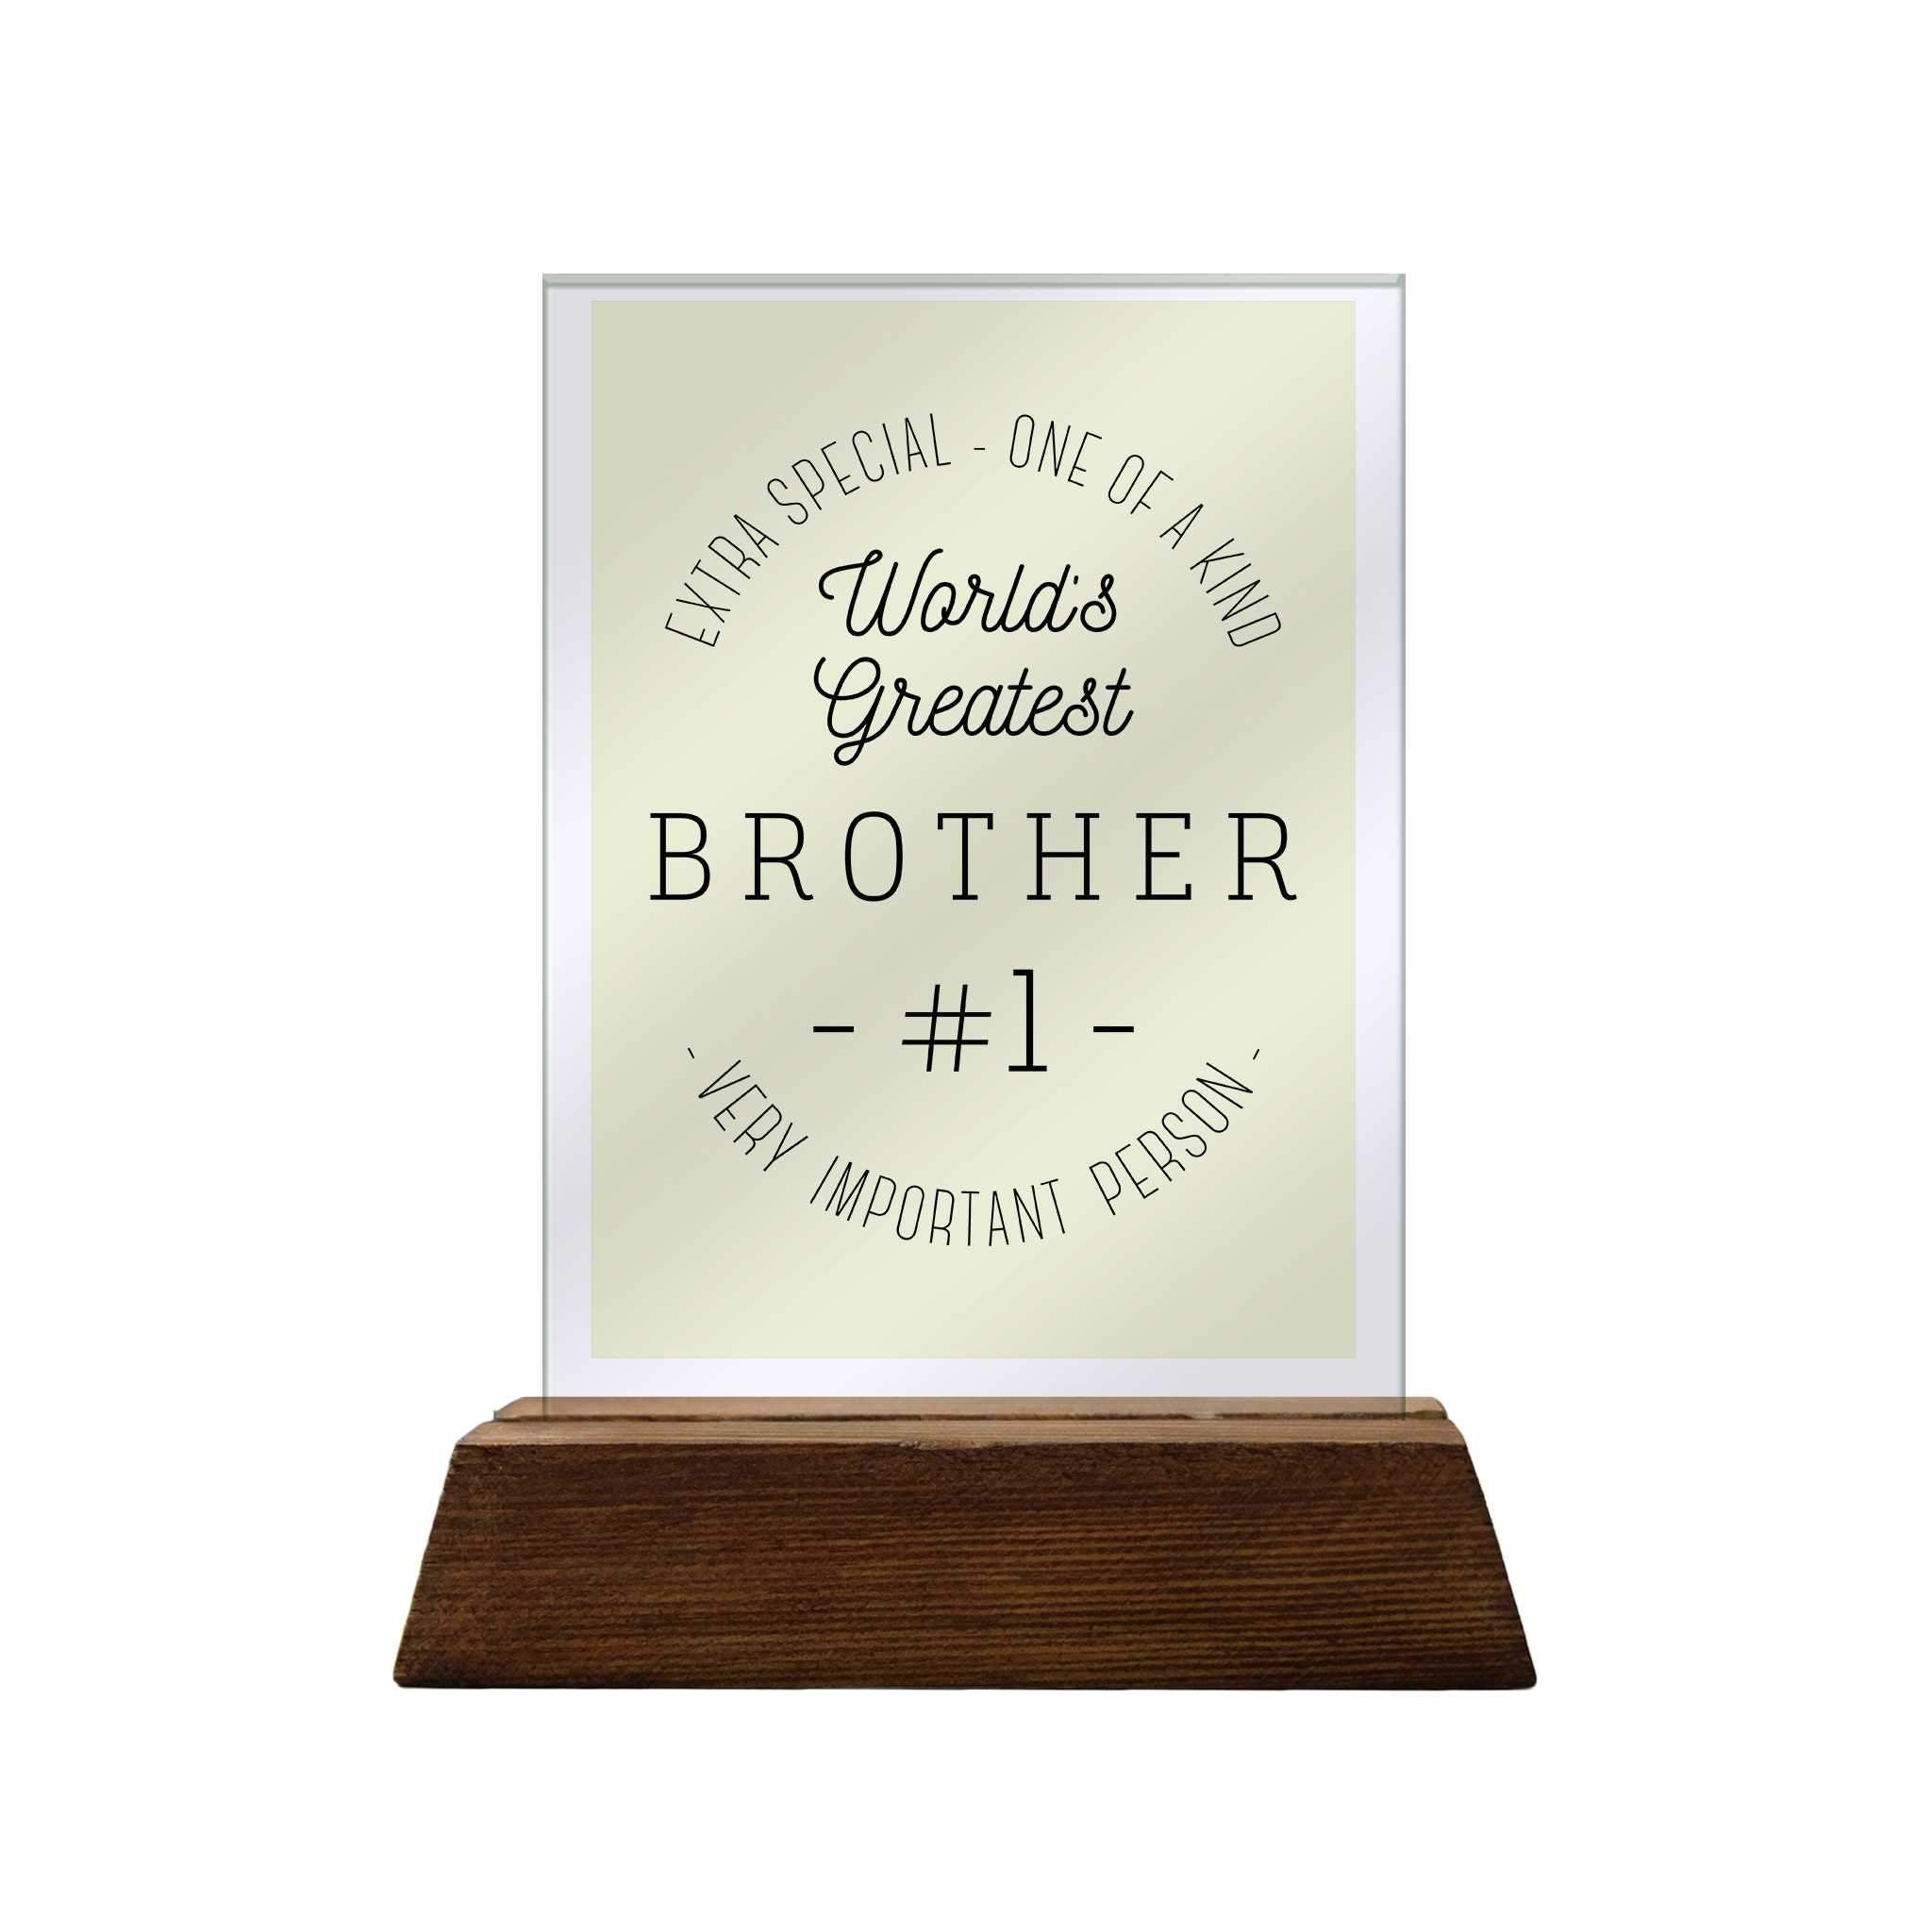 Extra Special One Of A Kind Brother Glass Plaque